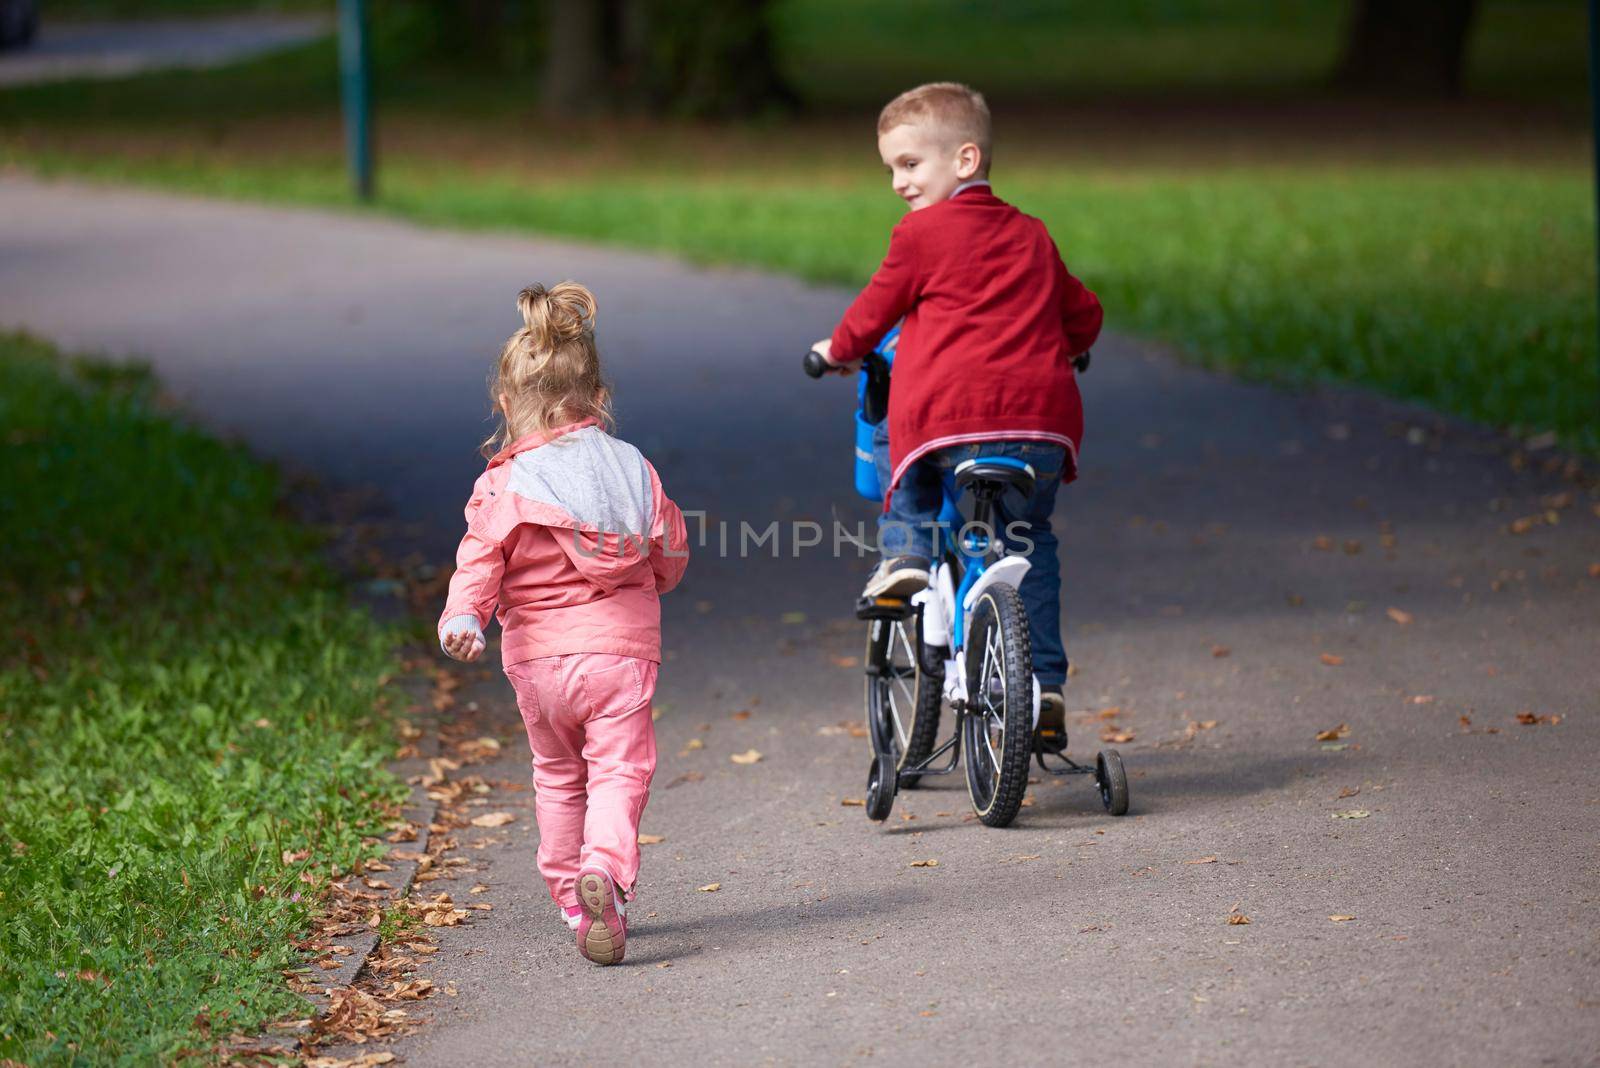 boy and girl with bicycle by dotshock